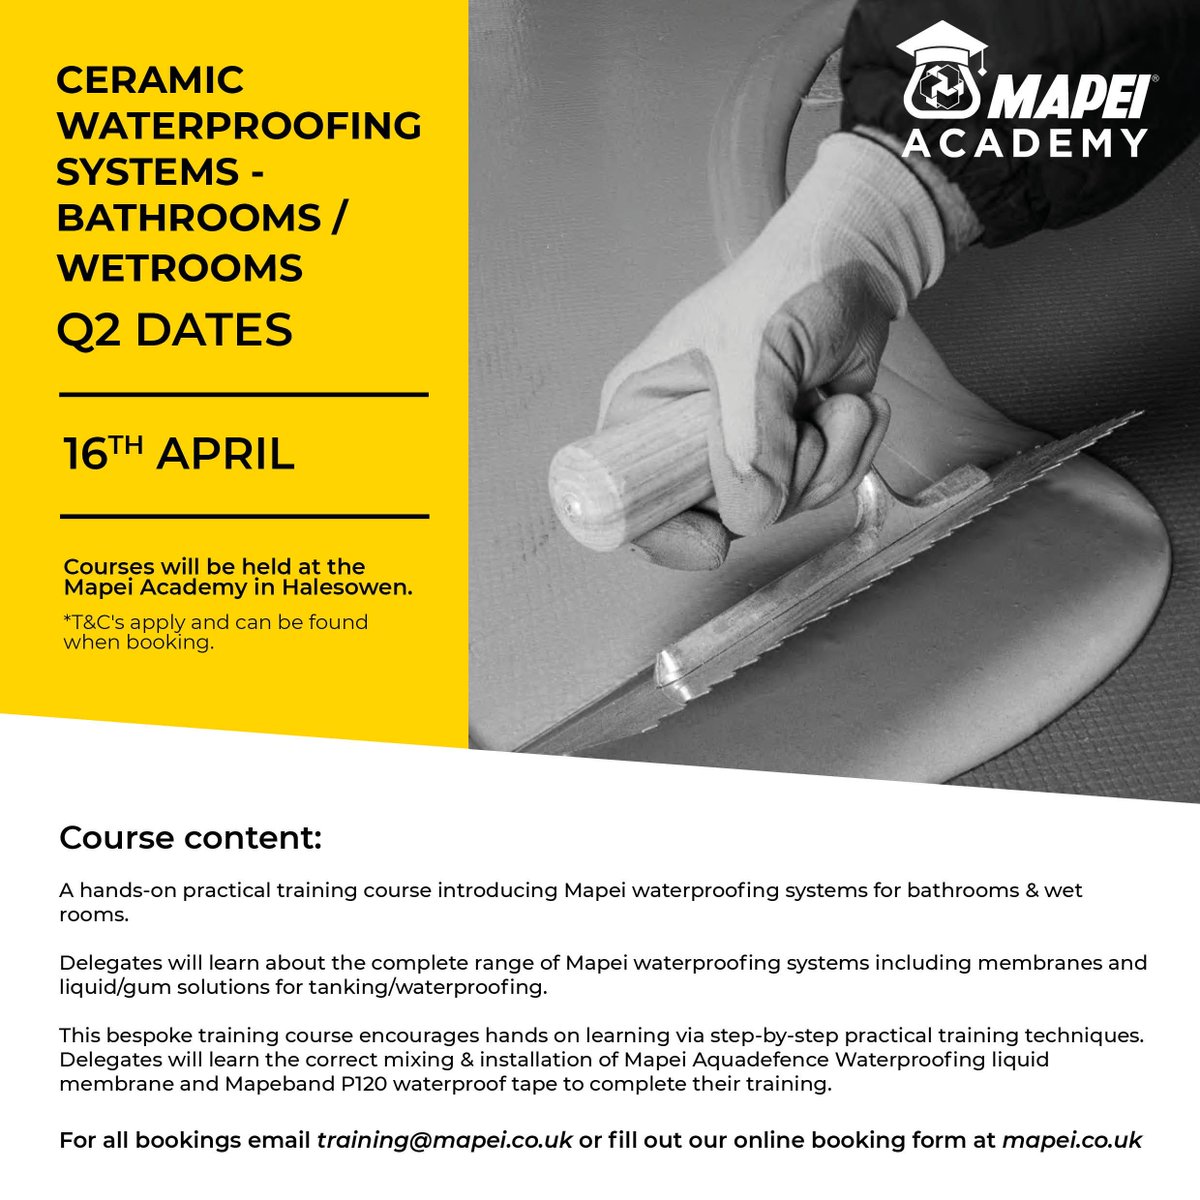 Adam and Sean will be hosting our free one day #Waterproofing Systems #training session at the #MapeAcademy on Tuesday 16th April. buff.ly/3PJ0uug #tiling #tiler #trade #DIY #bathroom #shower #wetroom #WaterproofingMembrane #ceramic #HowTo #education #waterproof #Mapei